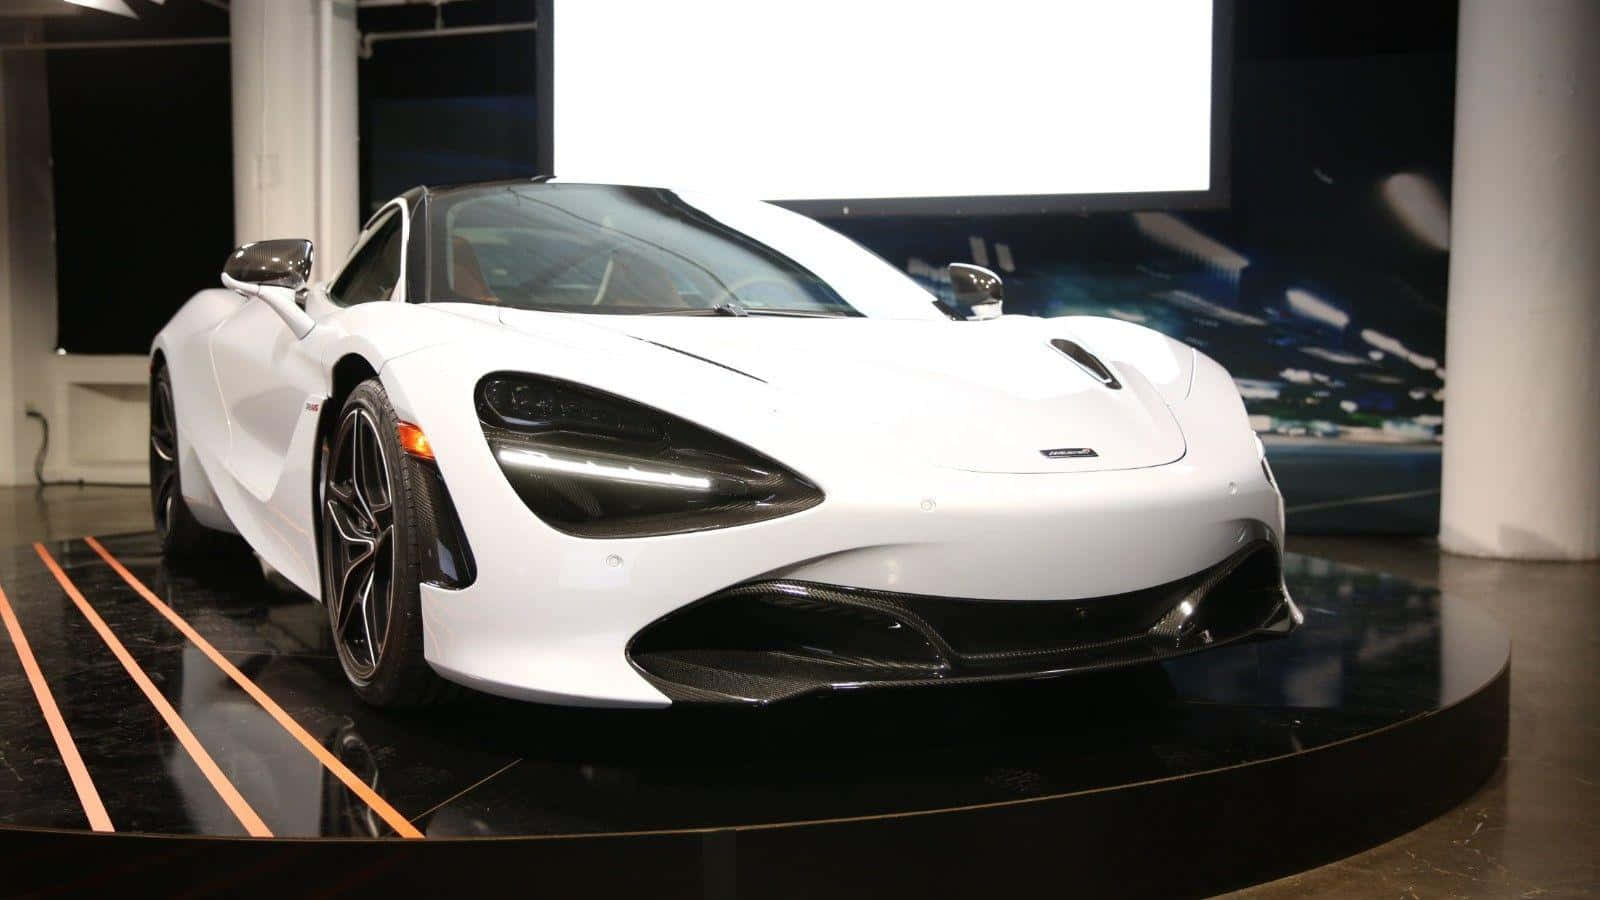 Explore the Great Outdoors with a McLaren 720s